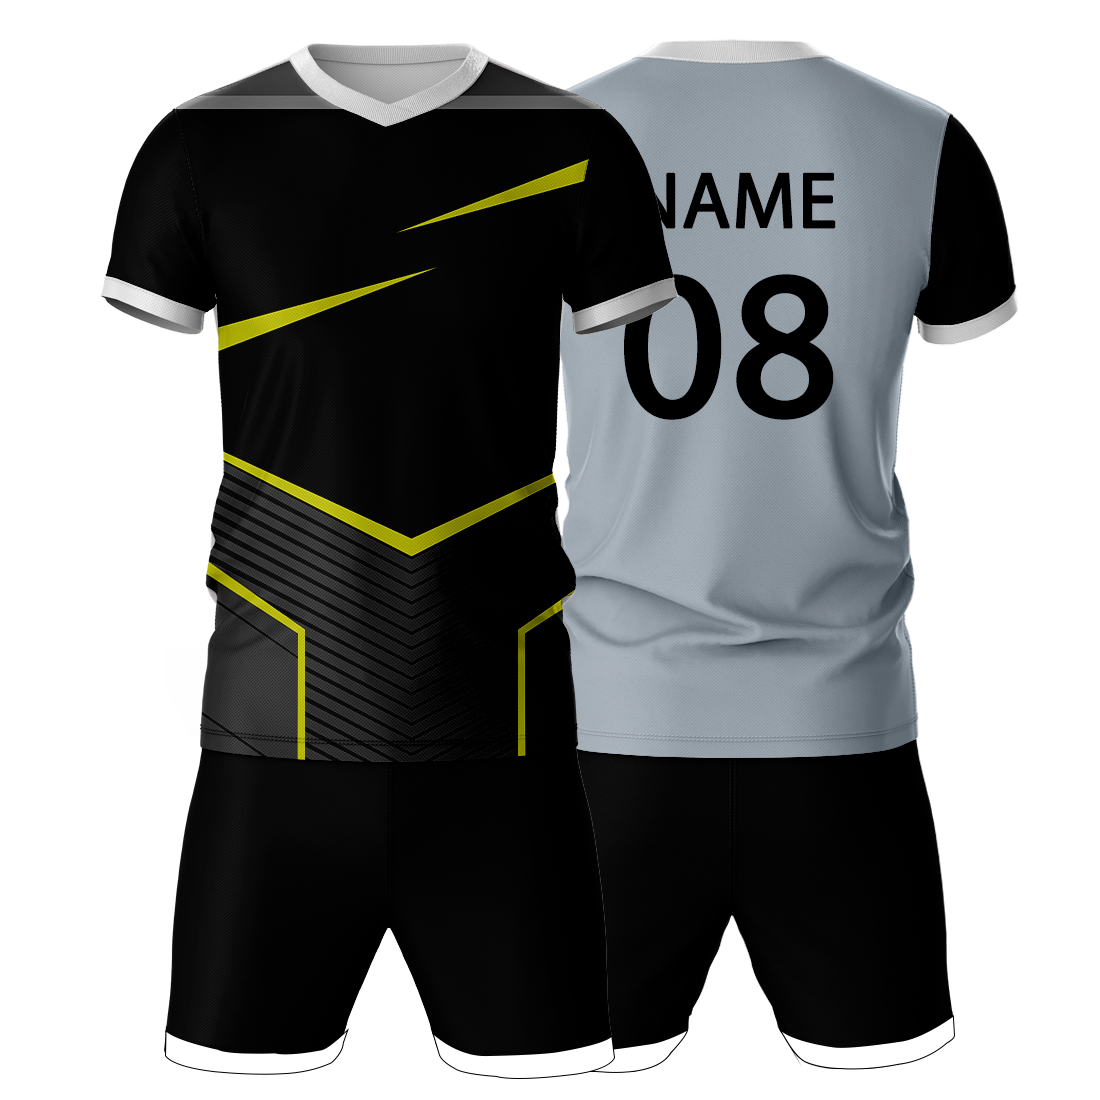 All Over Printed Jersey With Shorts Name & Number Printed.NP50000659